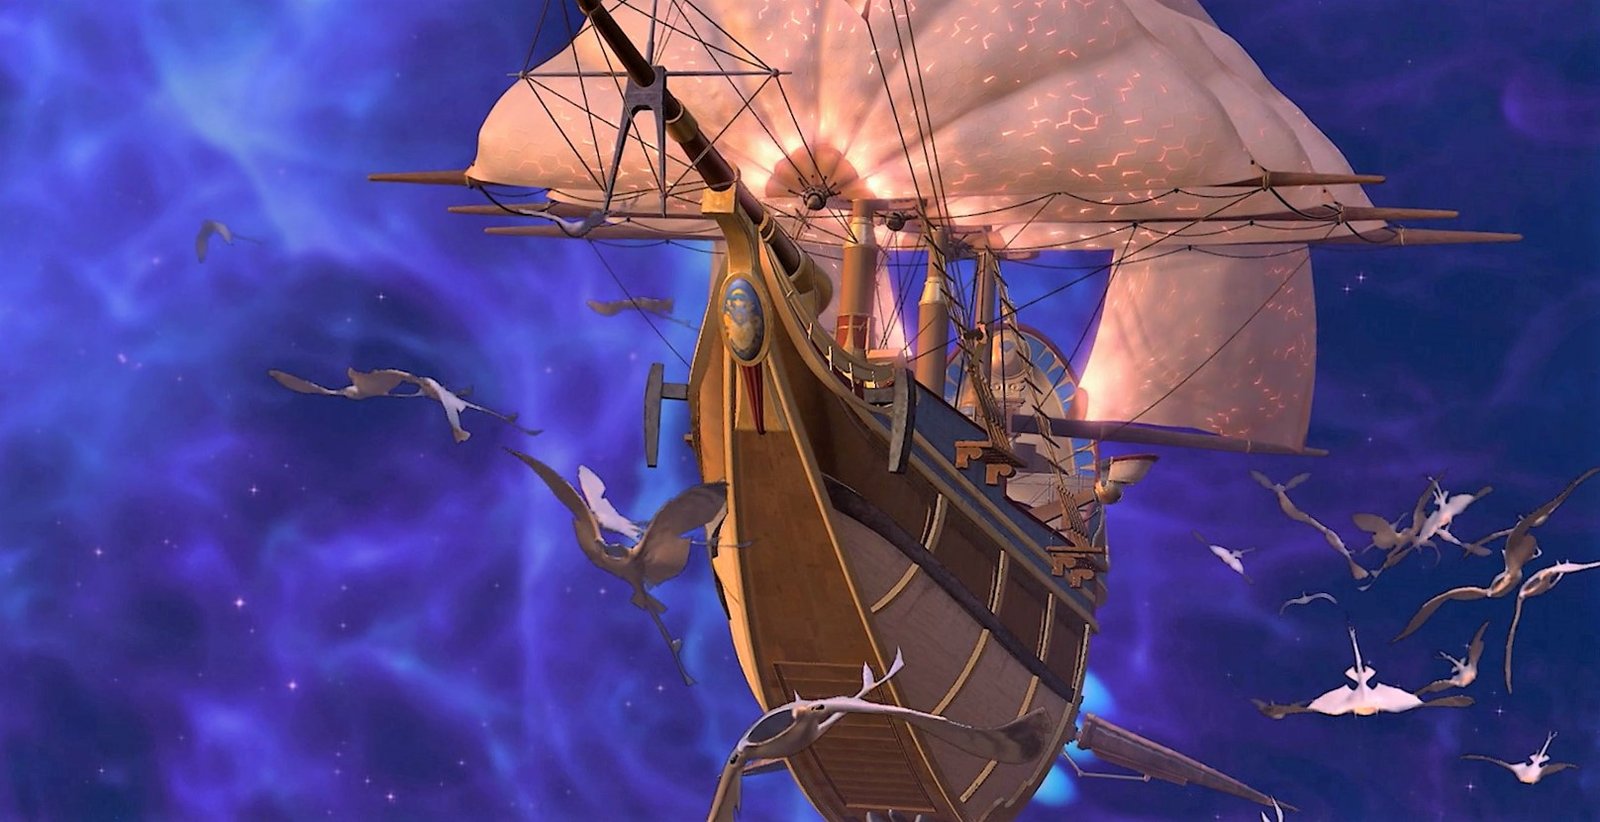 Treasure Planet: A Sci-Fi Spin on a Classic Tale